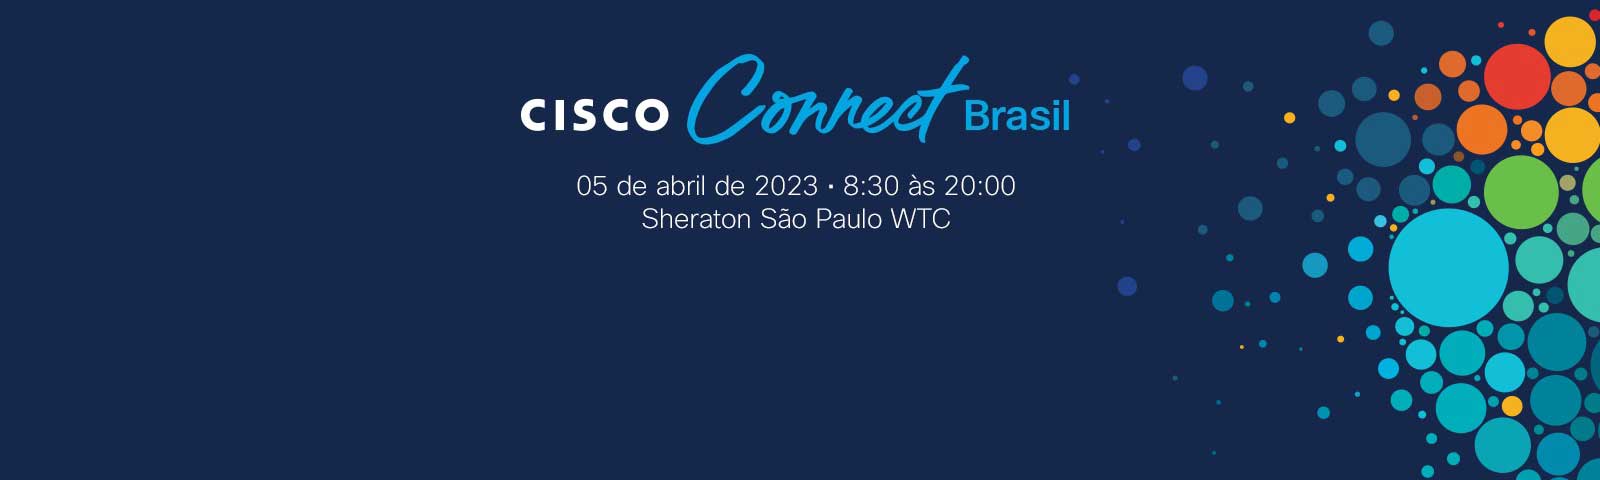 cisco-connect-marquee-br-1600x480